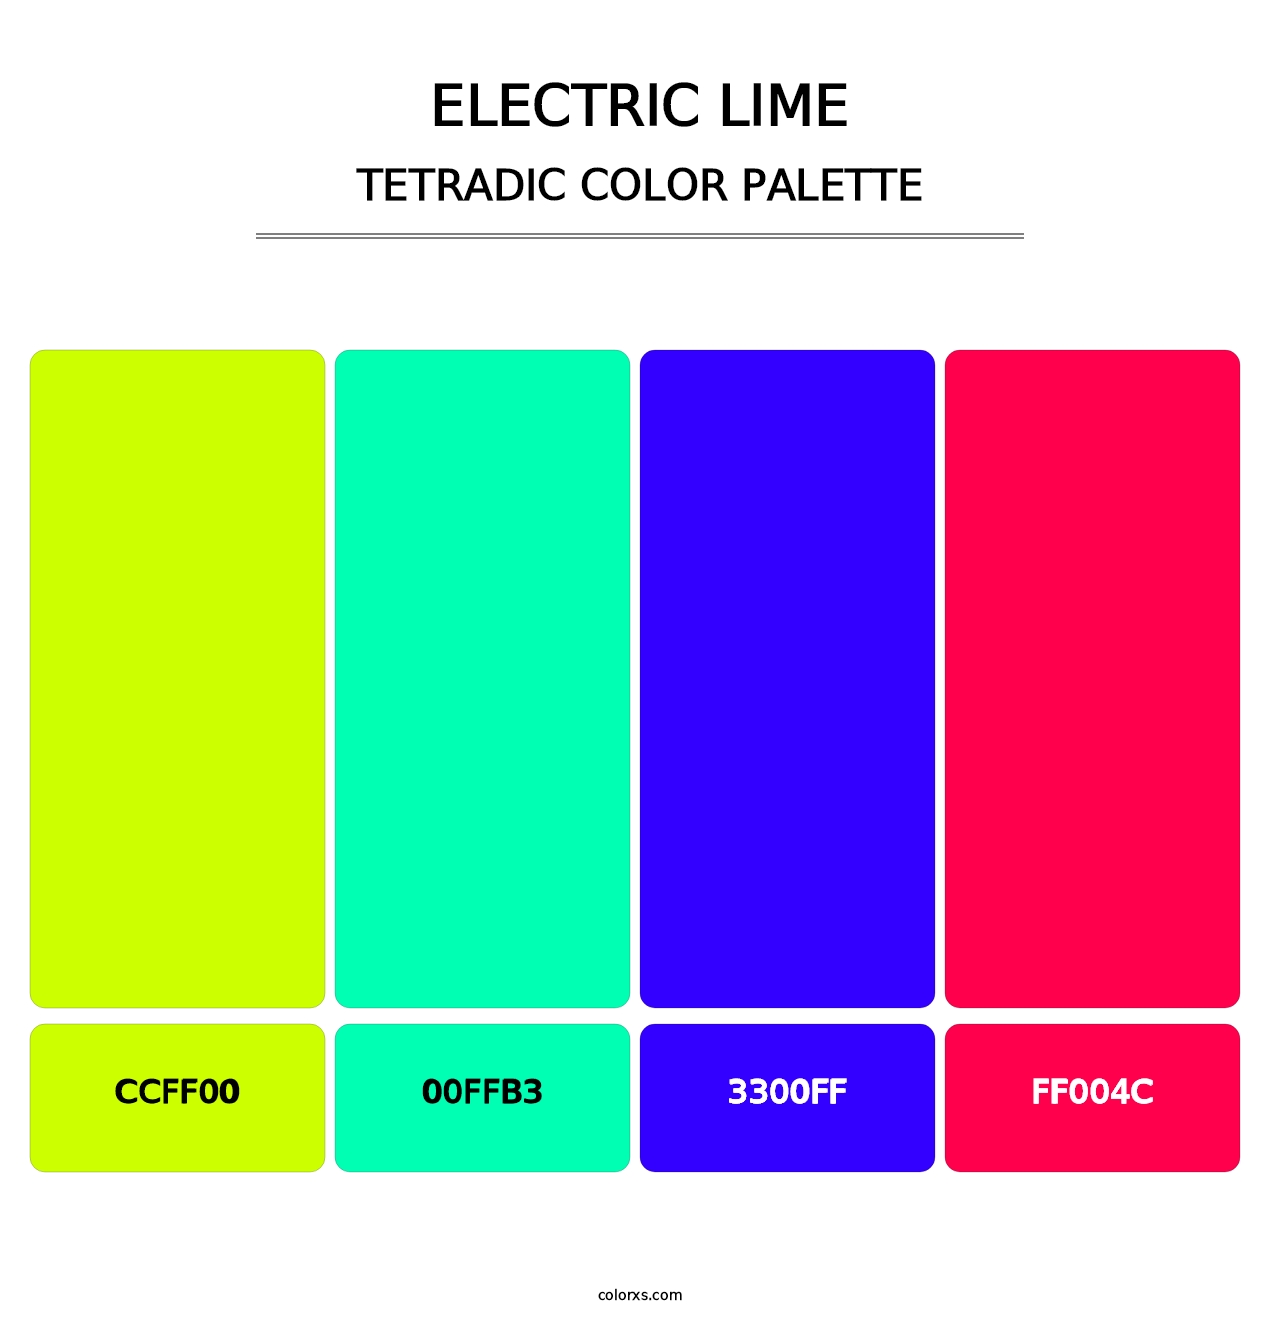 Electric Lime - Tetradic Color Palette